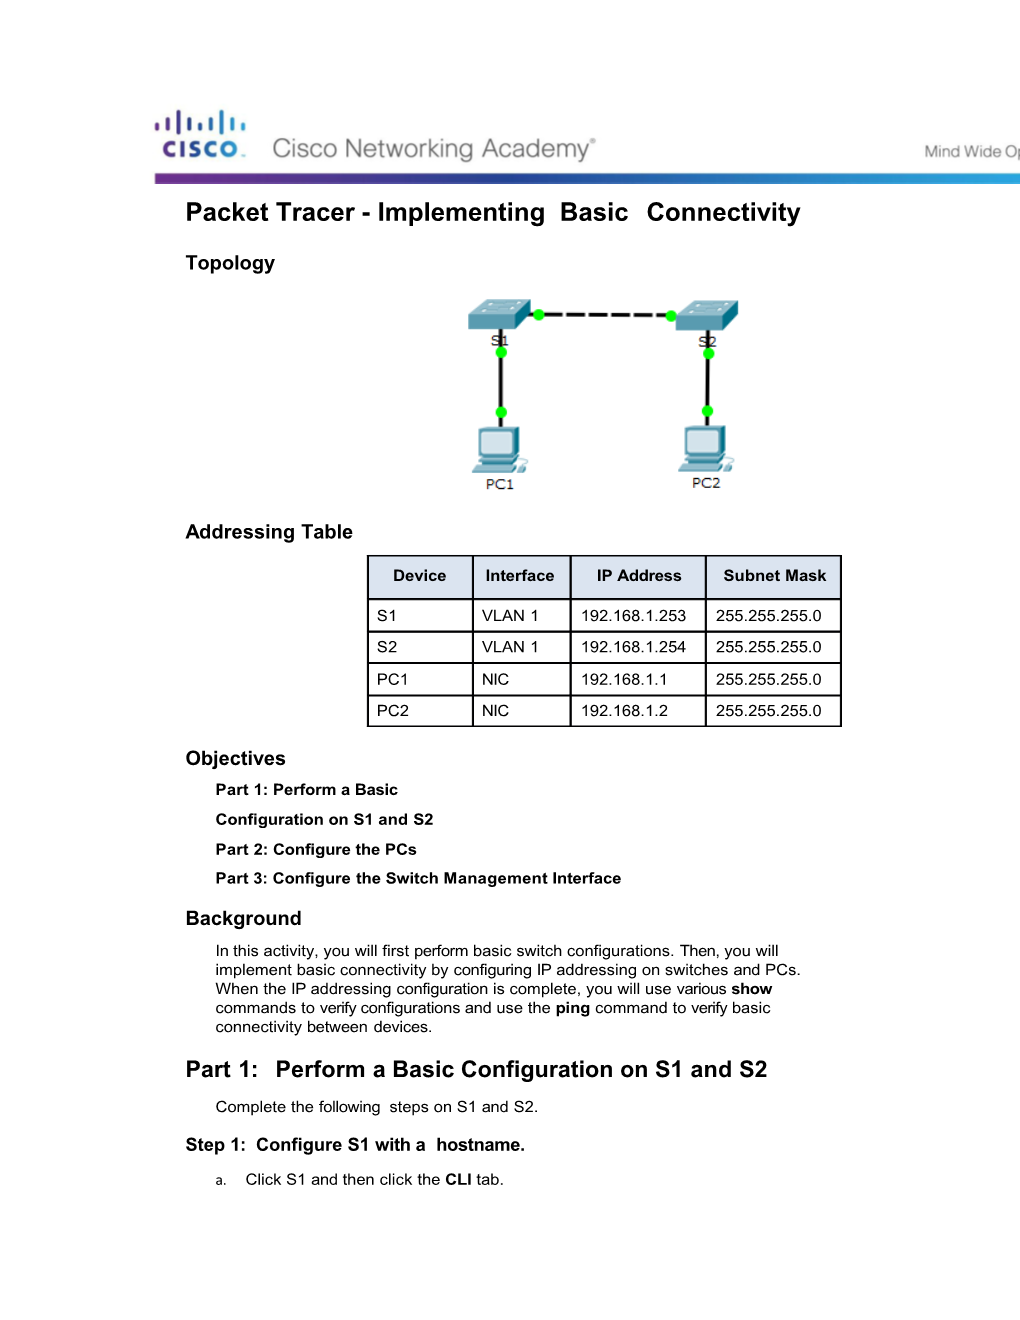 Packet Tracer - Implementing Basic Connectivity